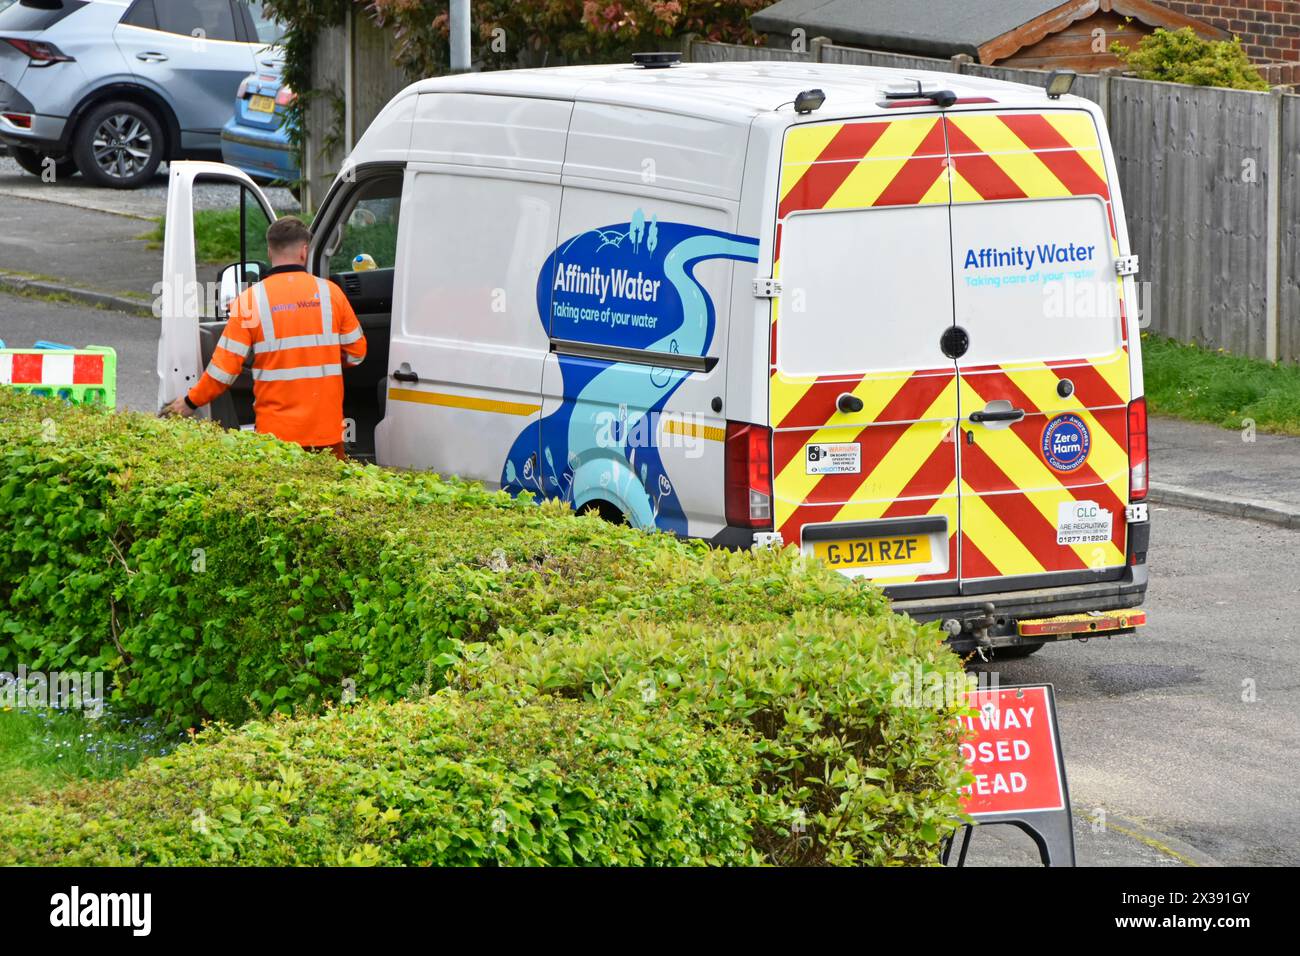 Affinity Water engineer at work on customers water supply in  front garden parked up in residential street side back view of van in Essex England UK Stock Photo